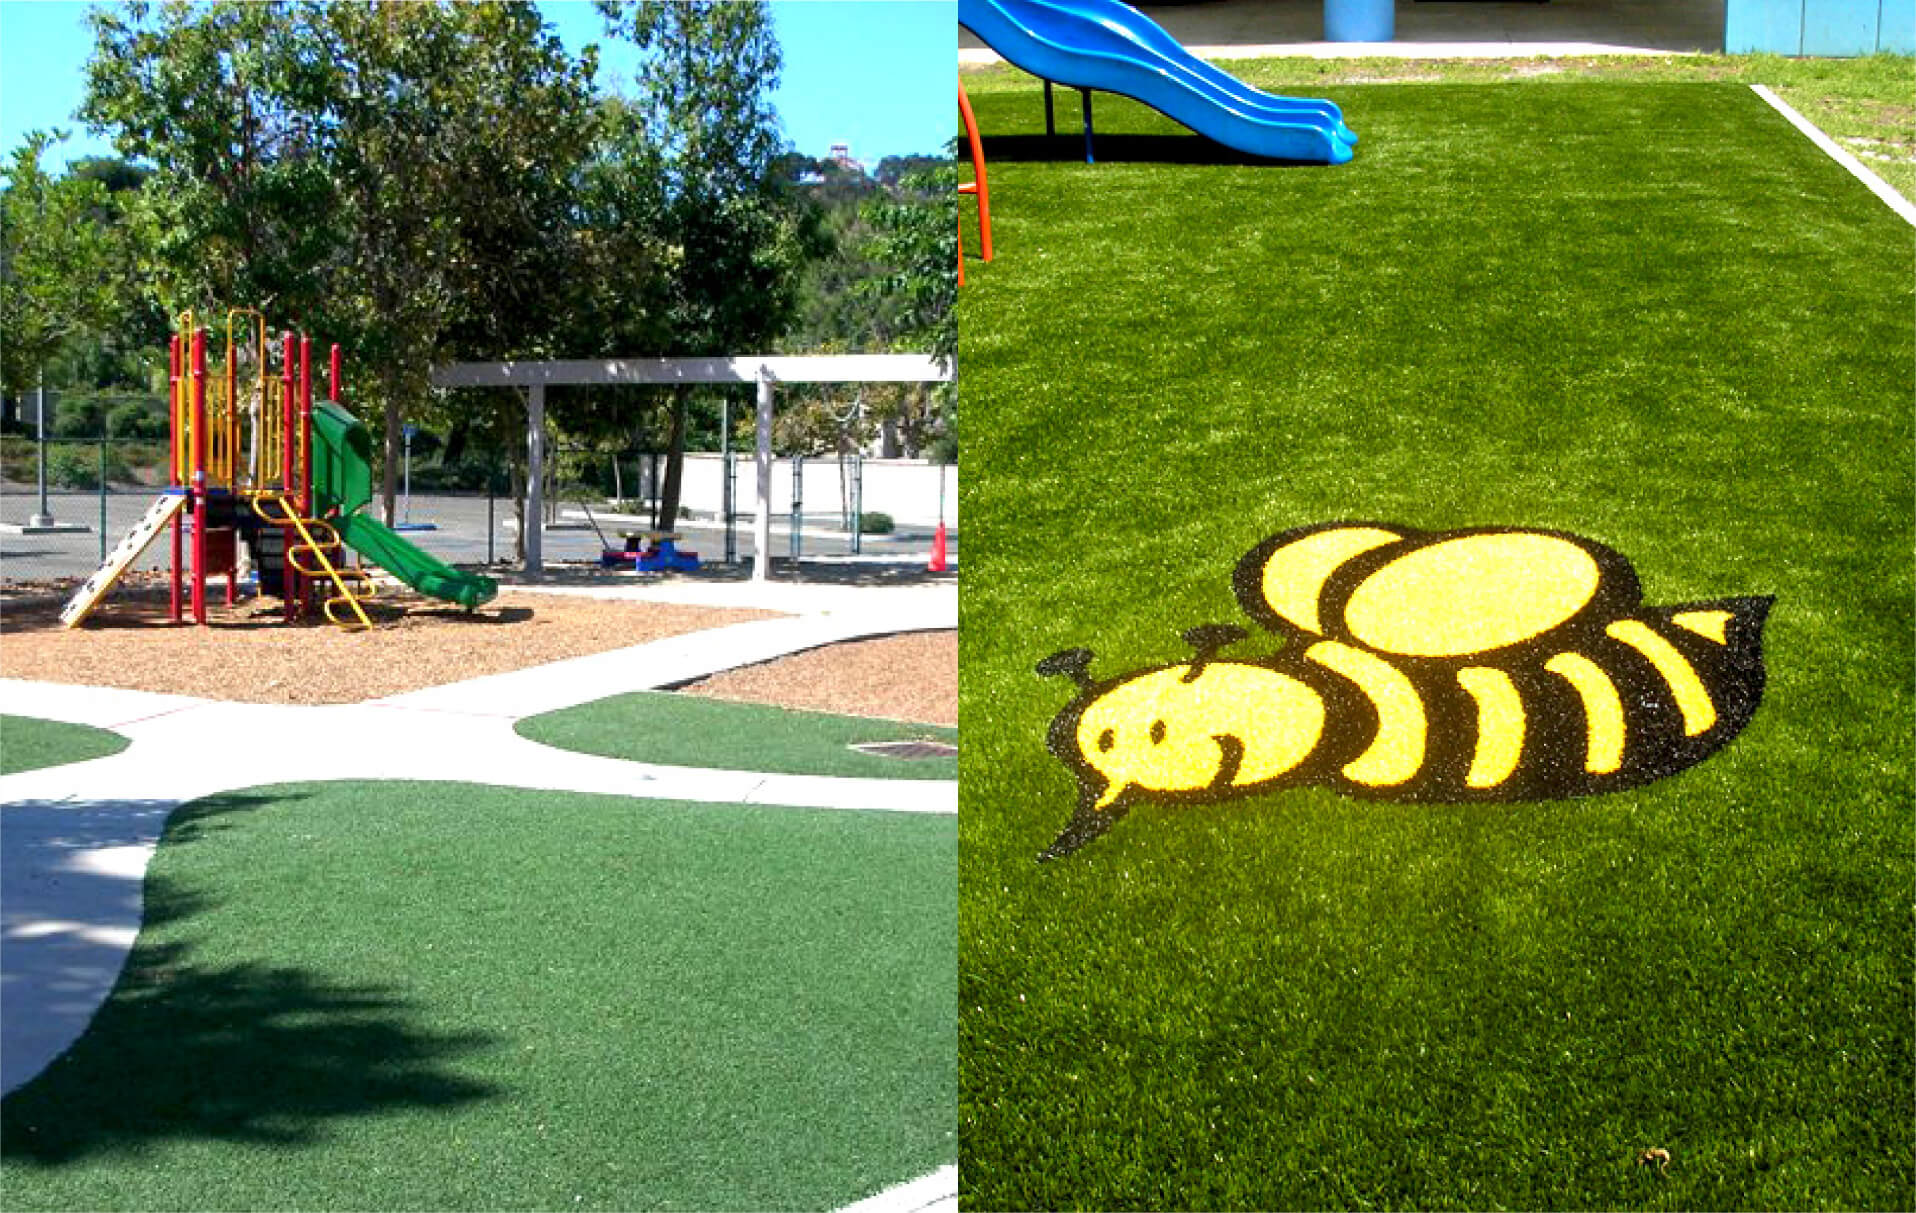 Complete your playground with <span style="color: #0AE294;font-weight: bold">Artificial Turf </span>